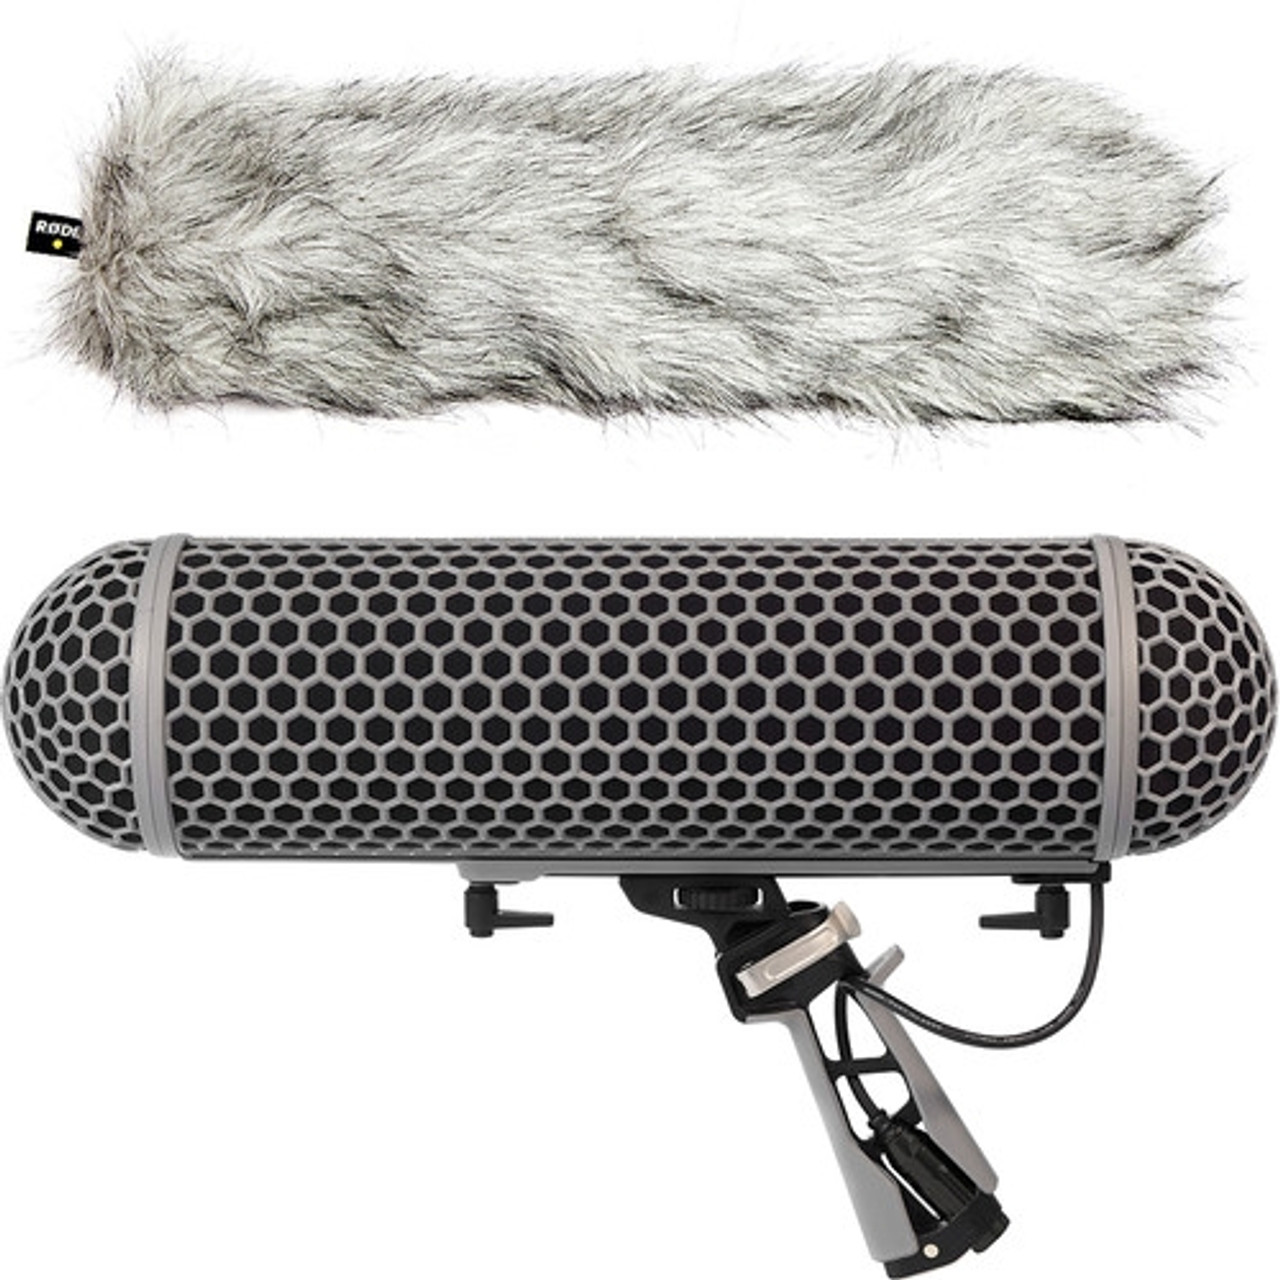 Microphone canon RODE NTG4+ + 7 accessoires